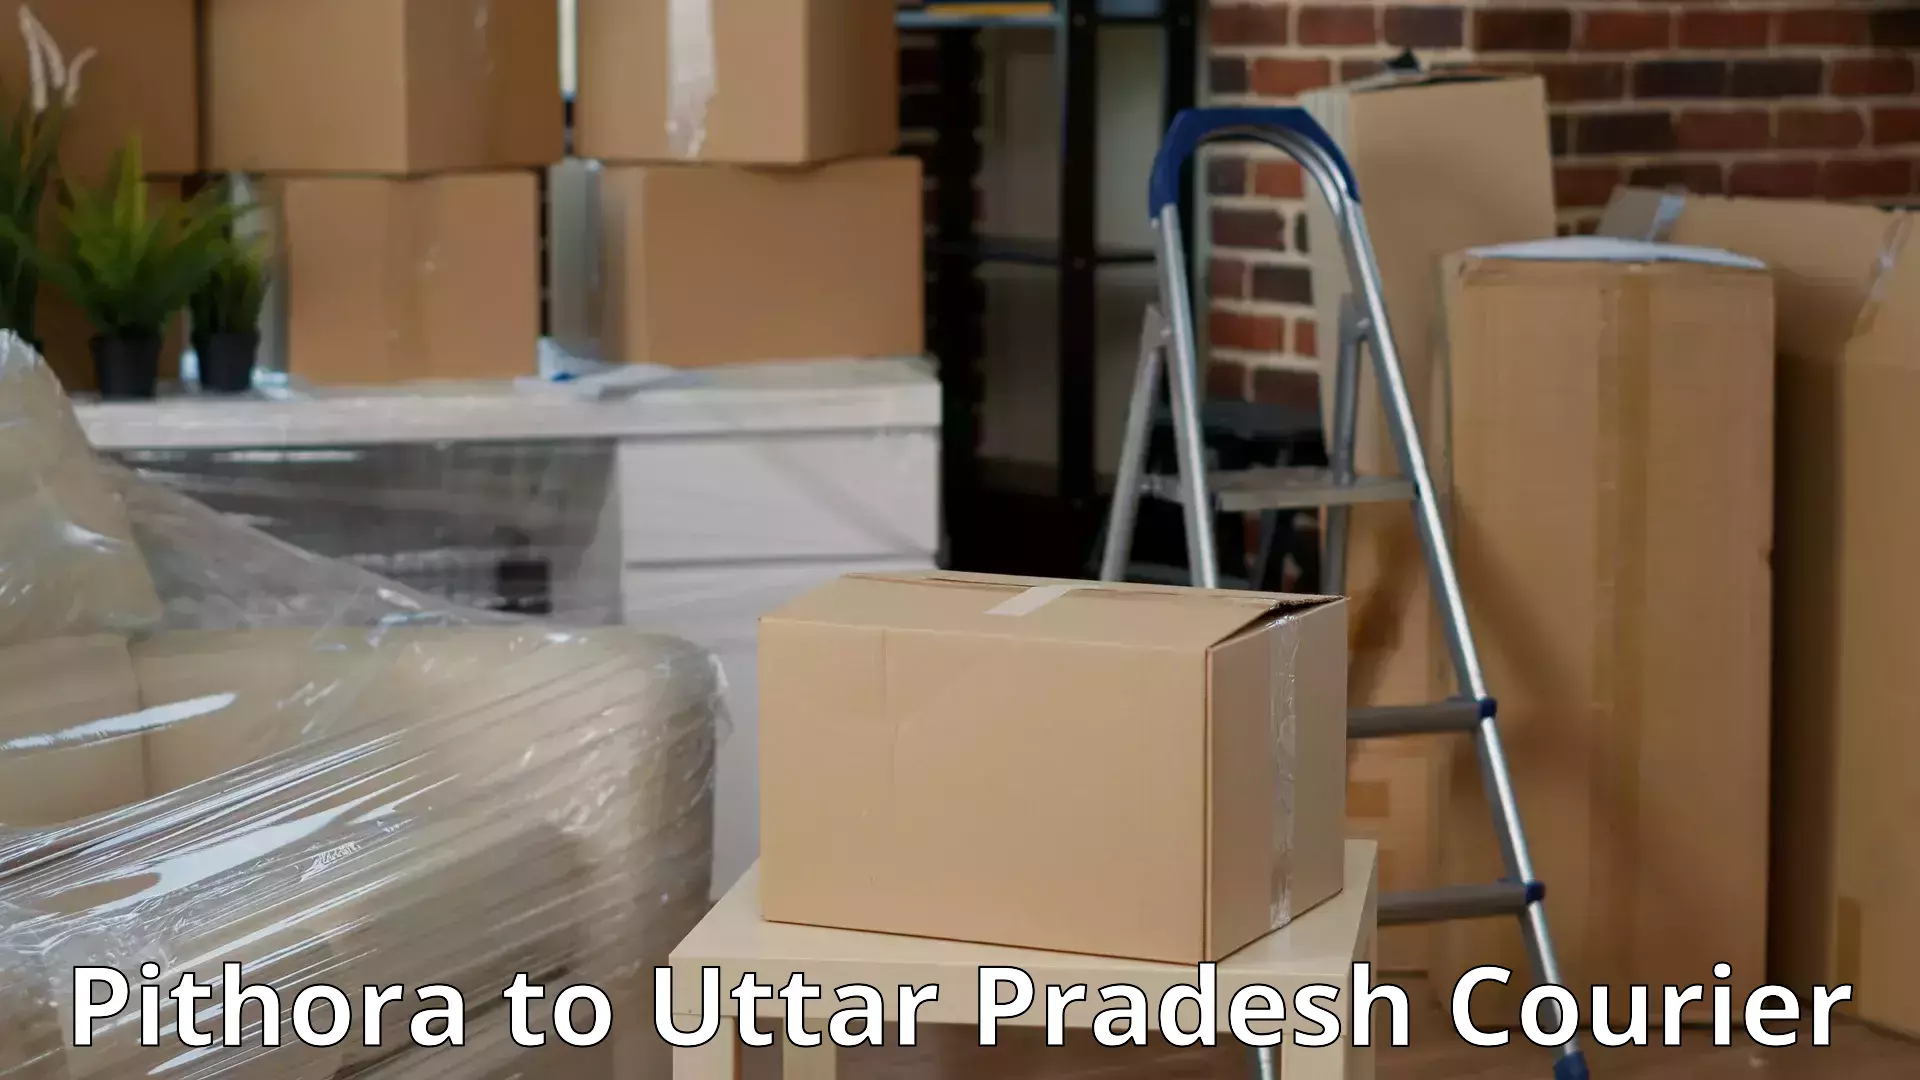 Trusted relocation experts Pithora to Fatehgarh